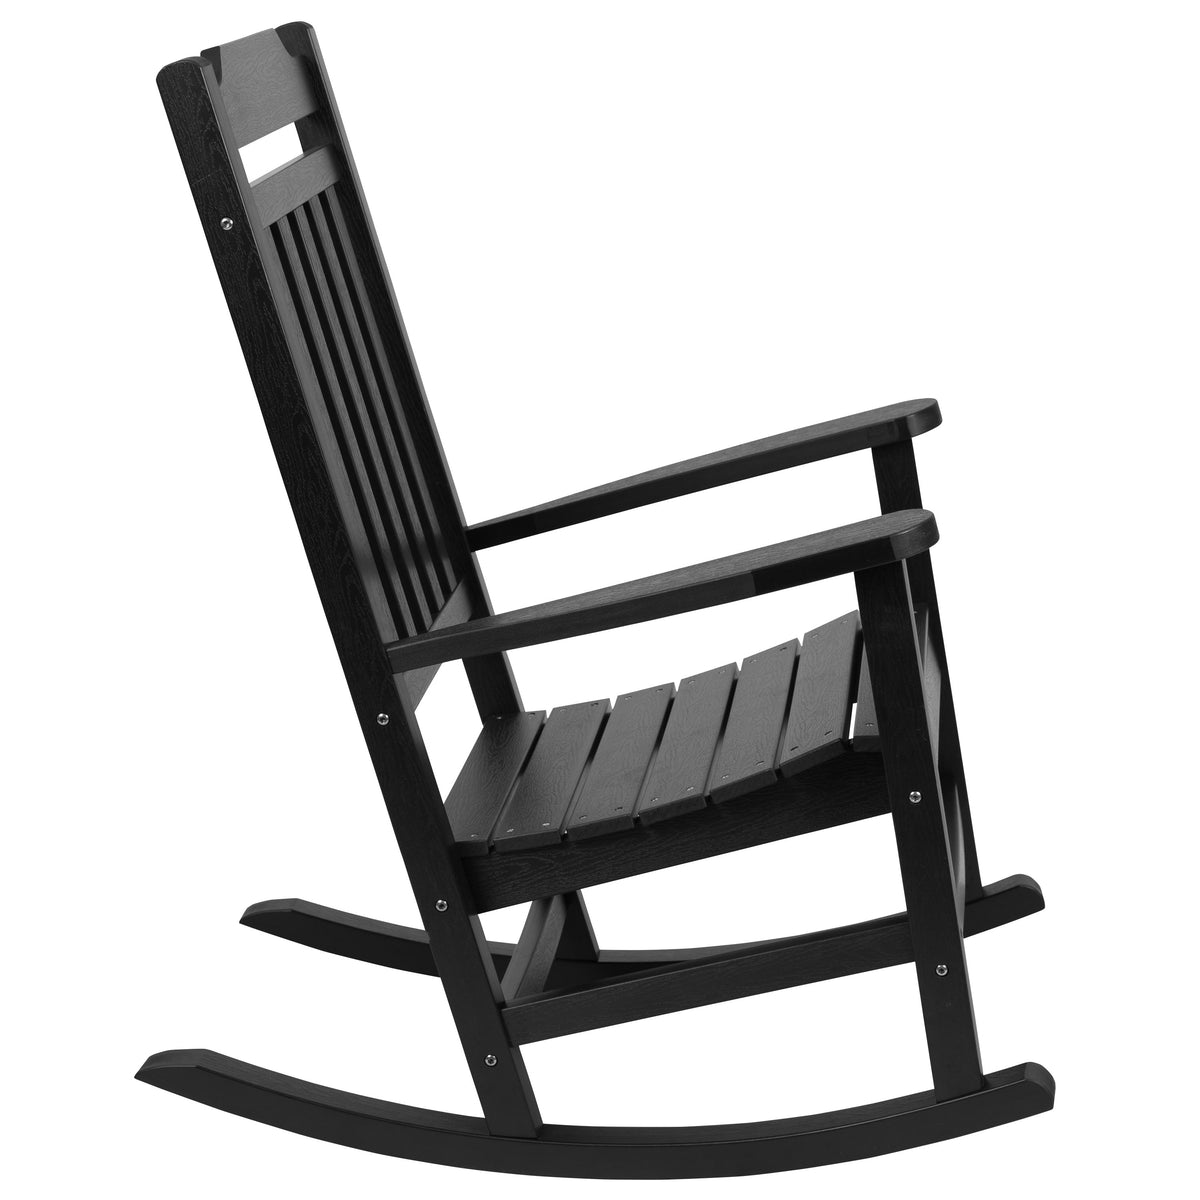 Black |#| Outdoor Patio All-Weather Poly Resin Wood Rocking Chair in Black